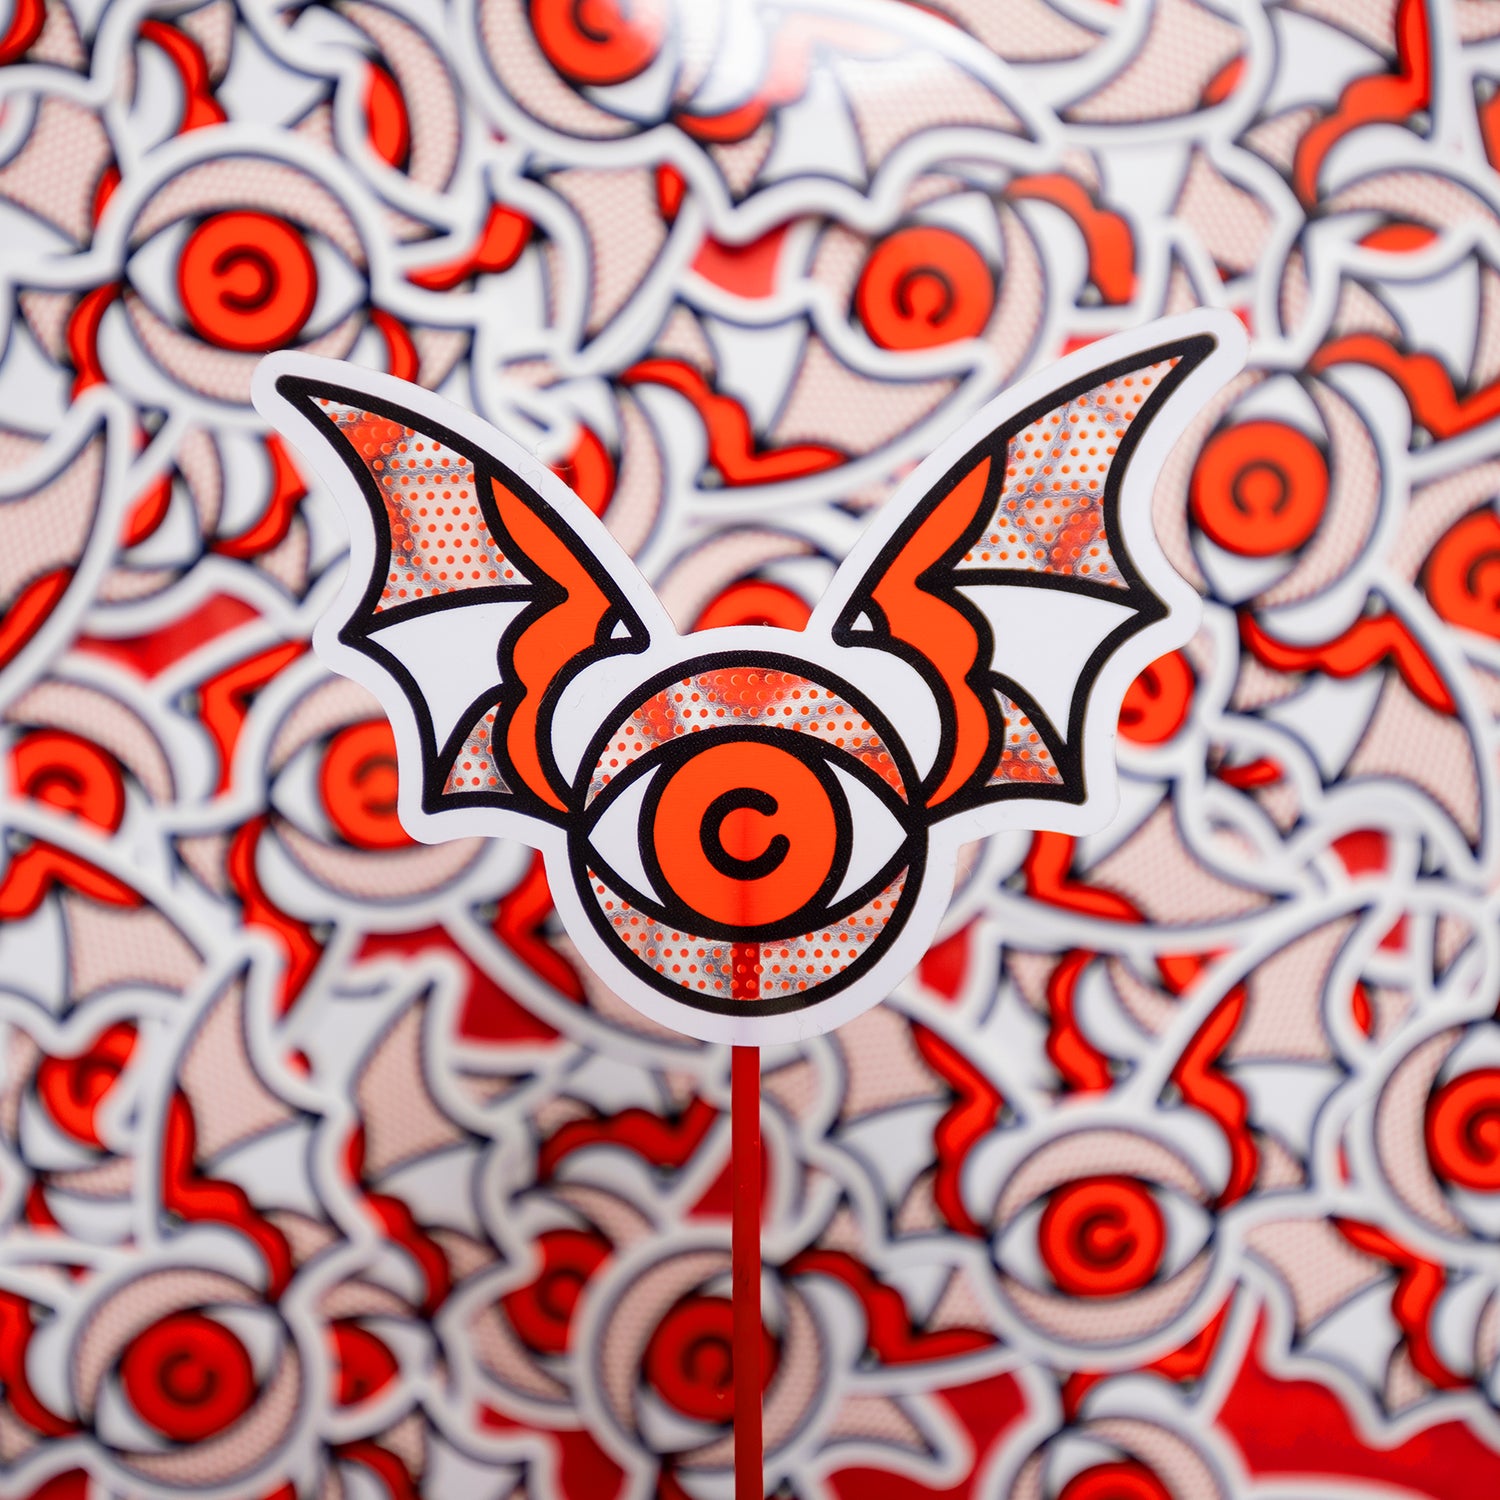 A 3x2.2" clear vinyl art sticker of an eyeball with bat wings drawn in a flash tattoo and pop art fusion style in a red, white and black color palette by the artist, Red Halftone.